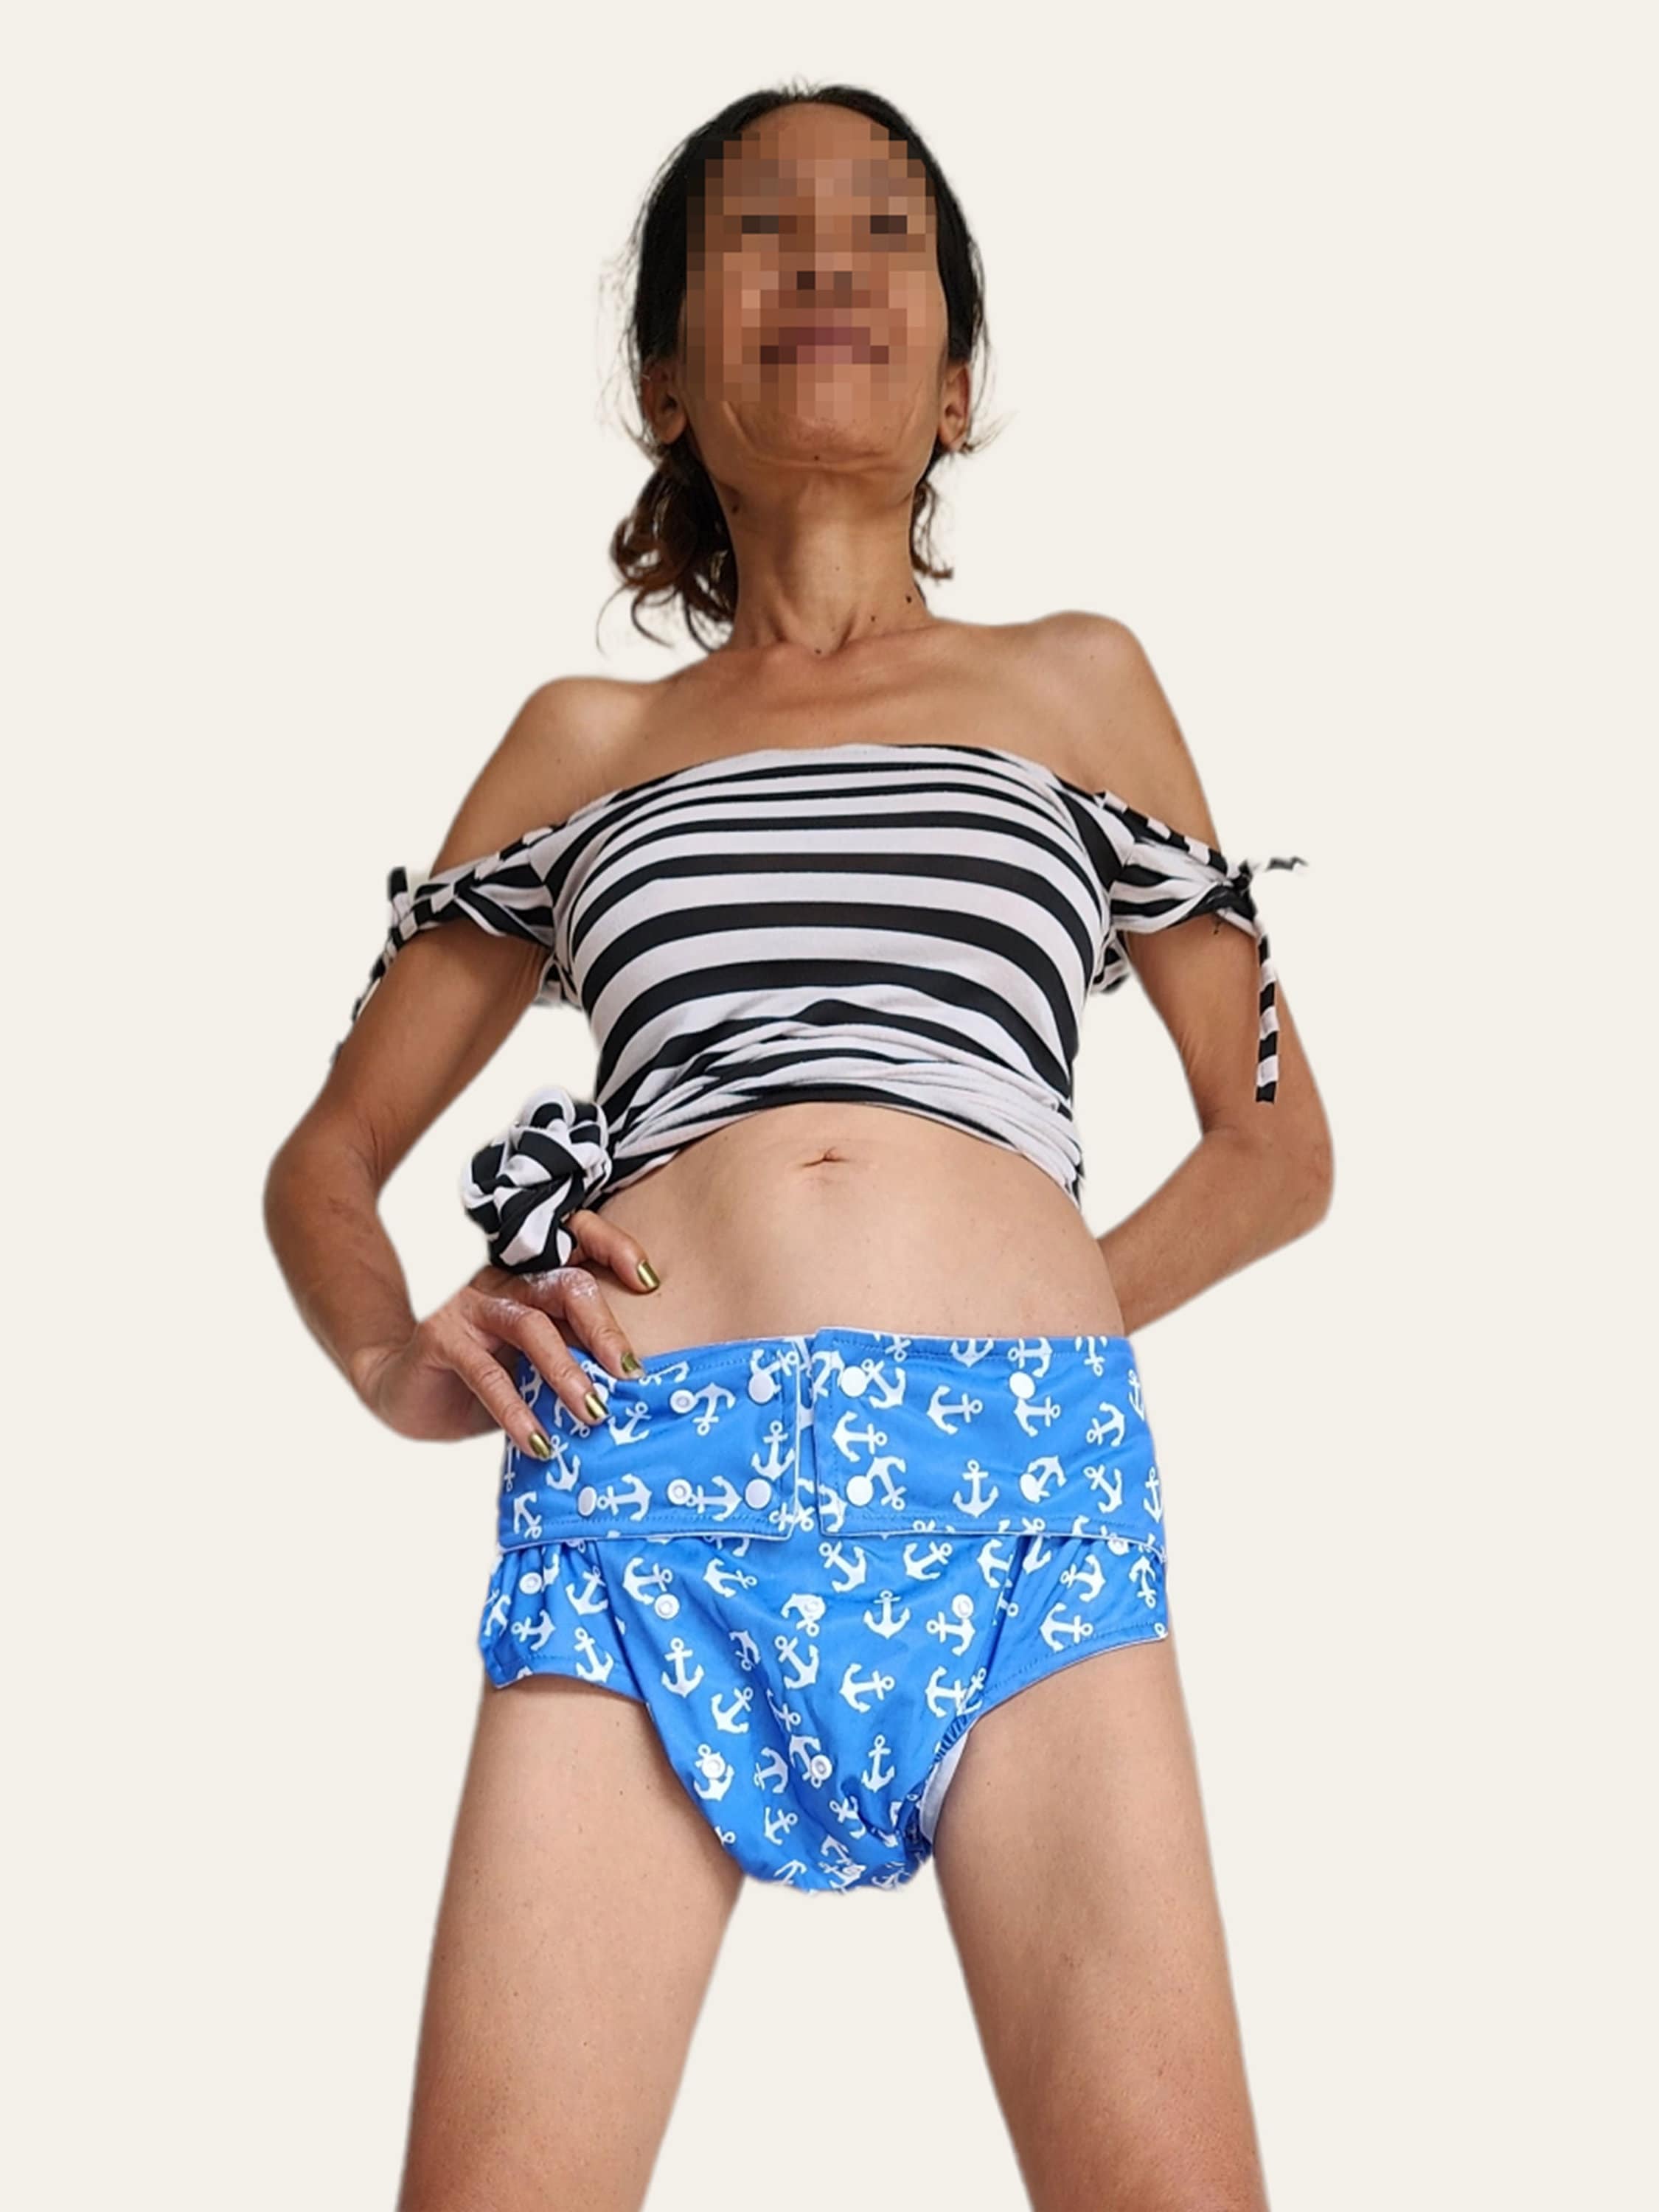 Adult Baby CLOTH DIAPER Blue Anchor Unisex Reusable - Etsy